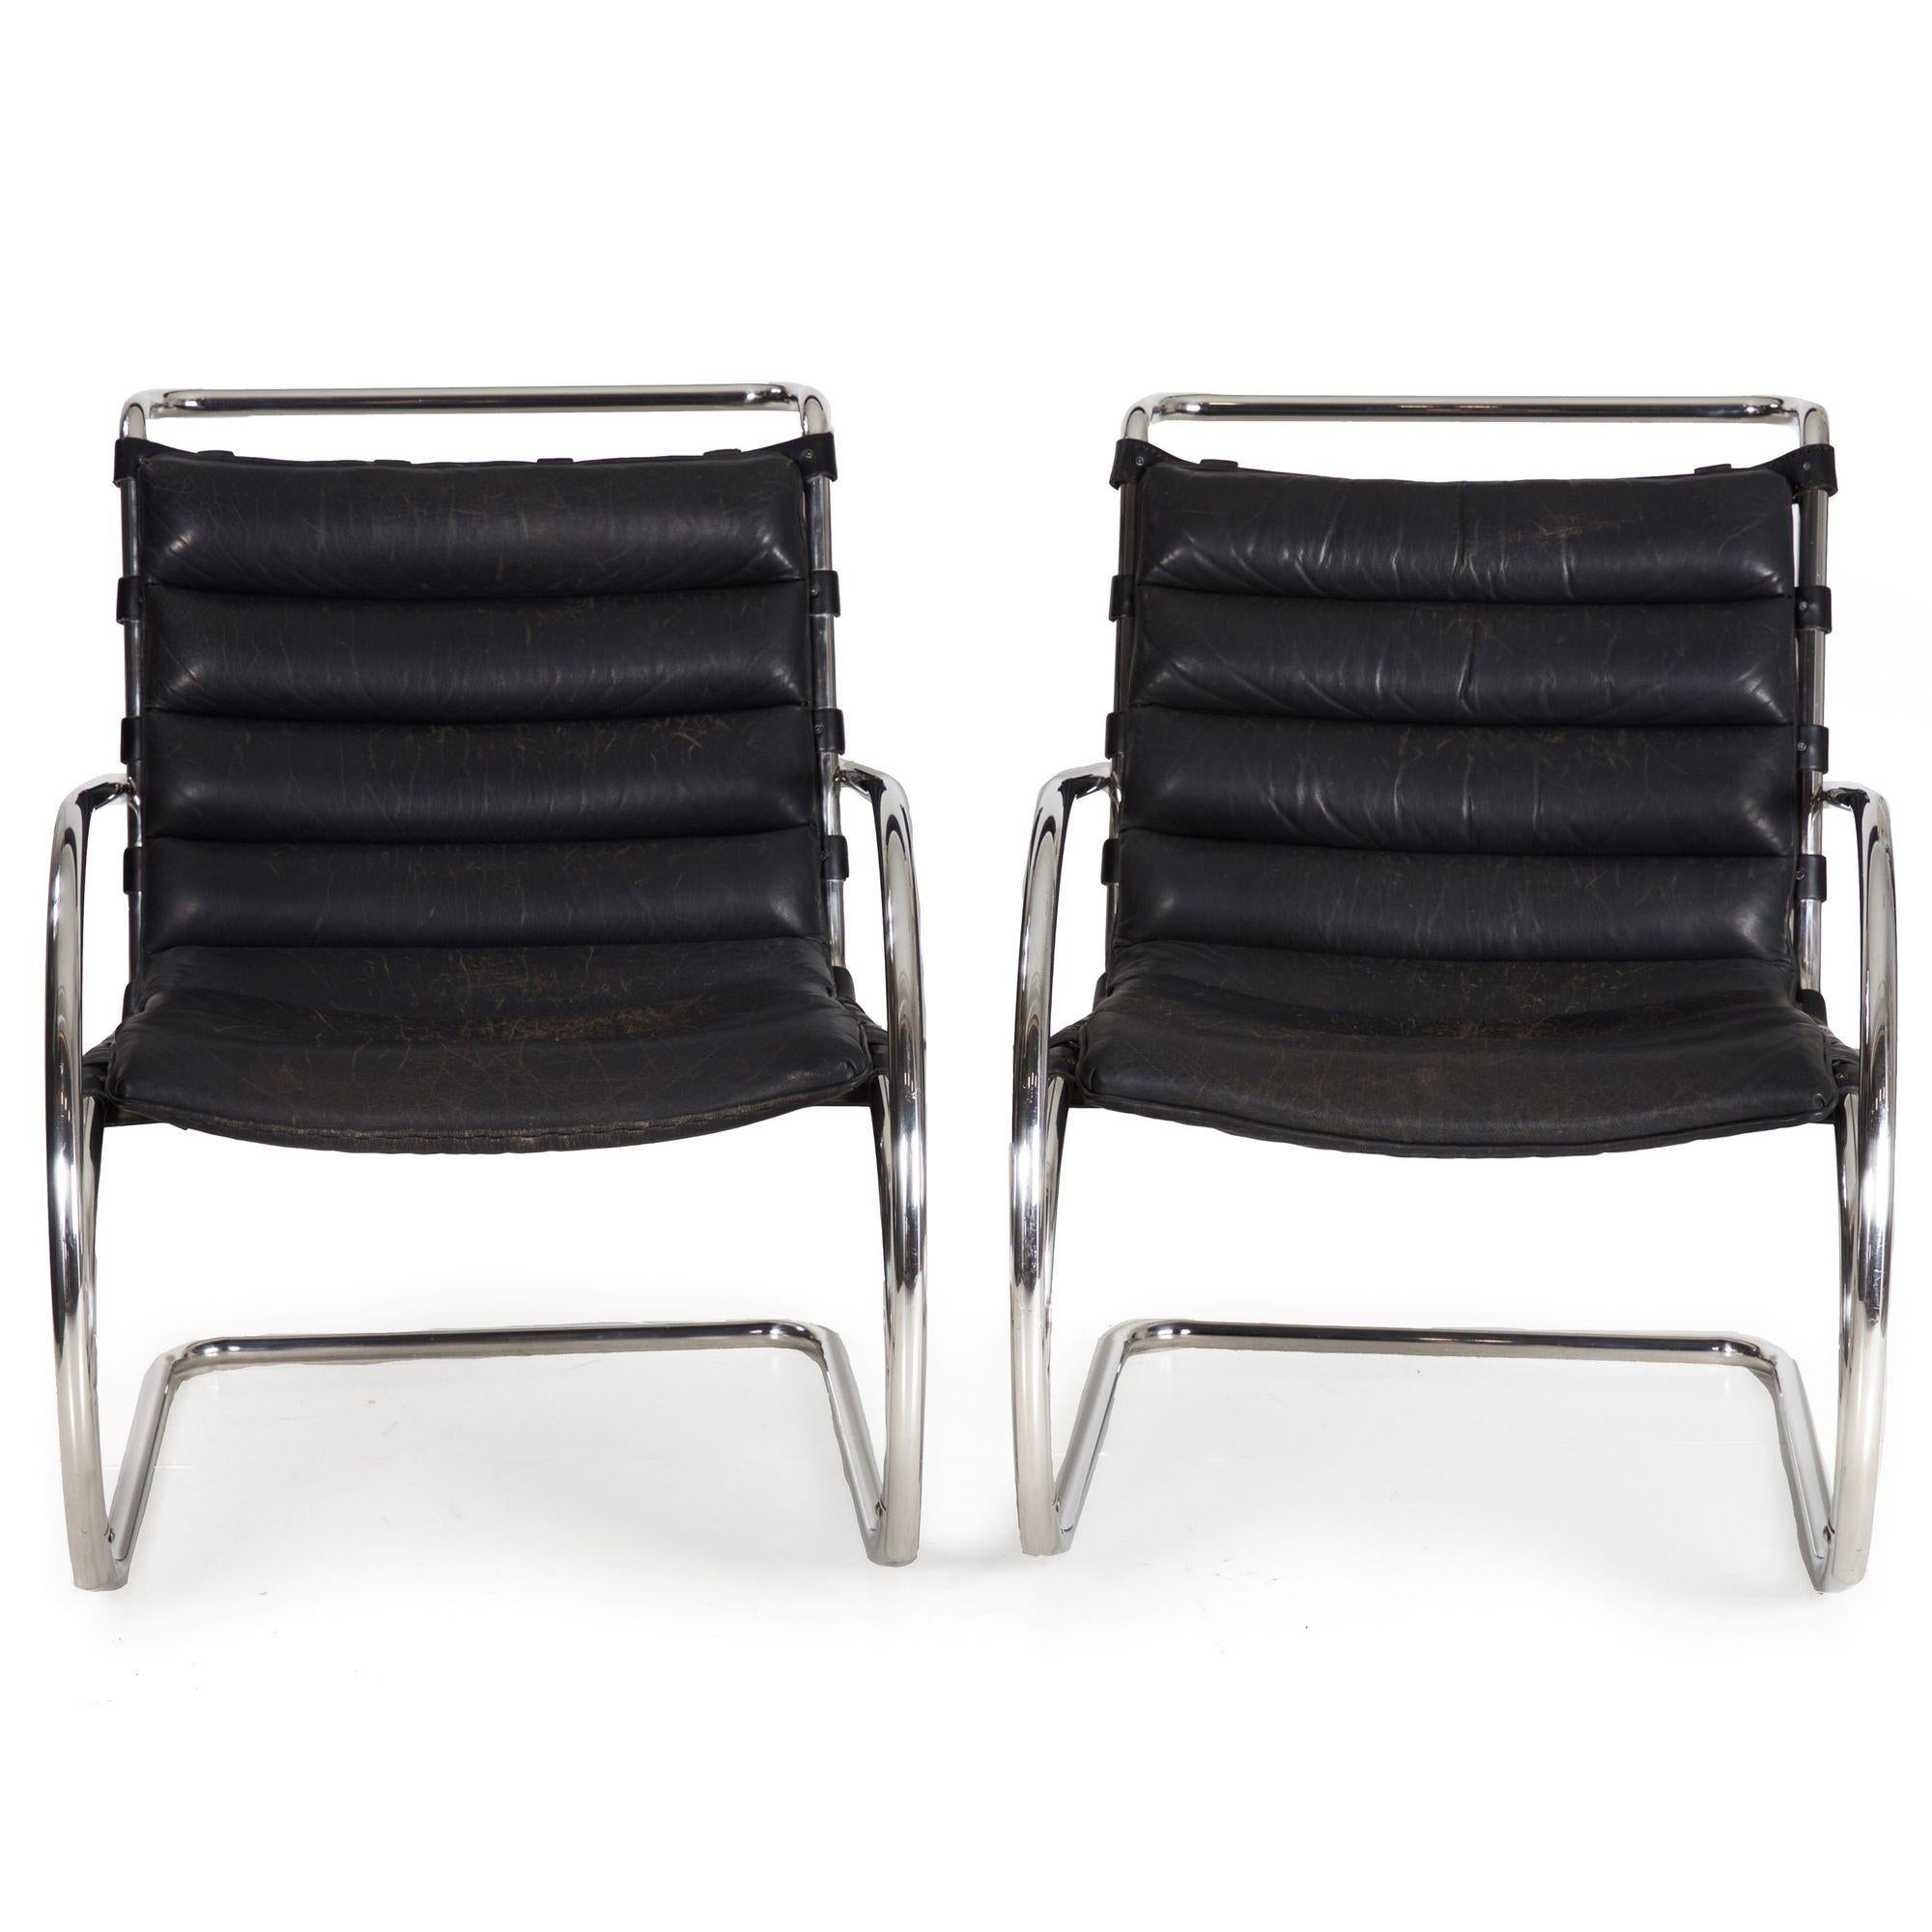 MR BLACK LEATHER AND CHROME STEEL LOUNGE CHAIRS - A PAIR
Designed by Mies van der Rohe for Knoll International, circa last quarter of 20th century  original Knoll labels affixed to the underside
Item # 205WKP14Q 

A very sleek pair of MR lounge